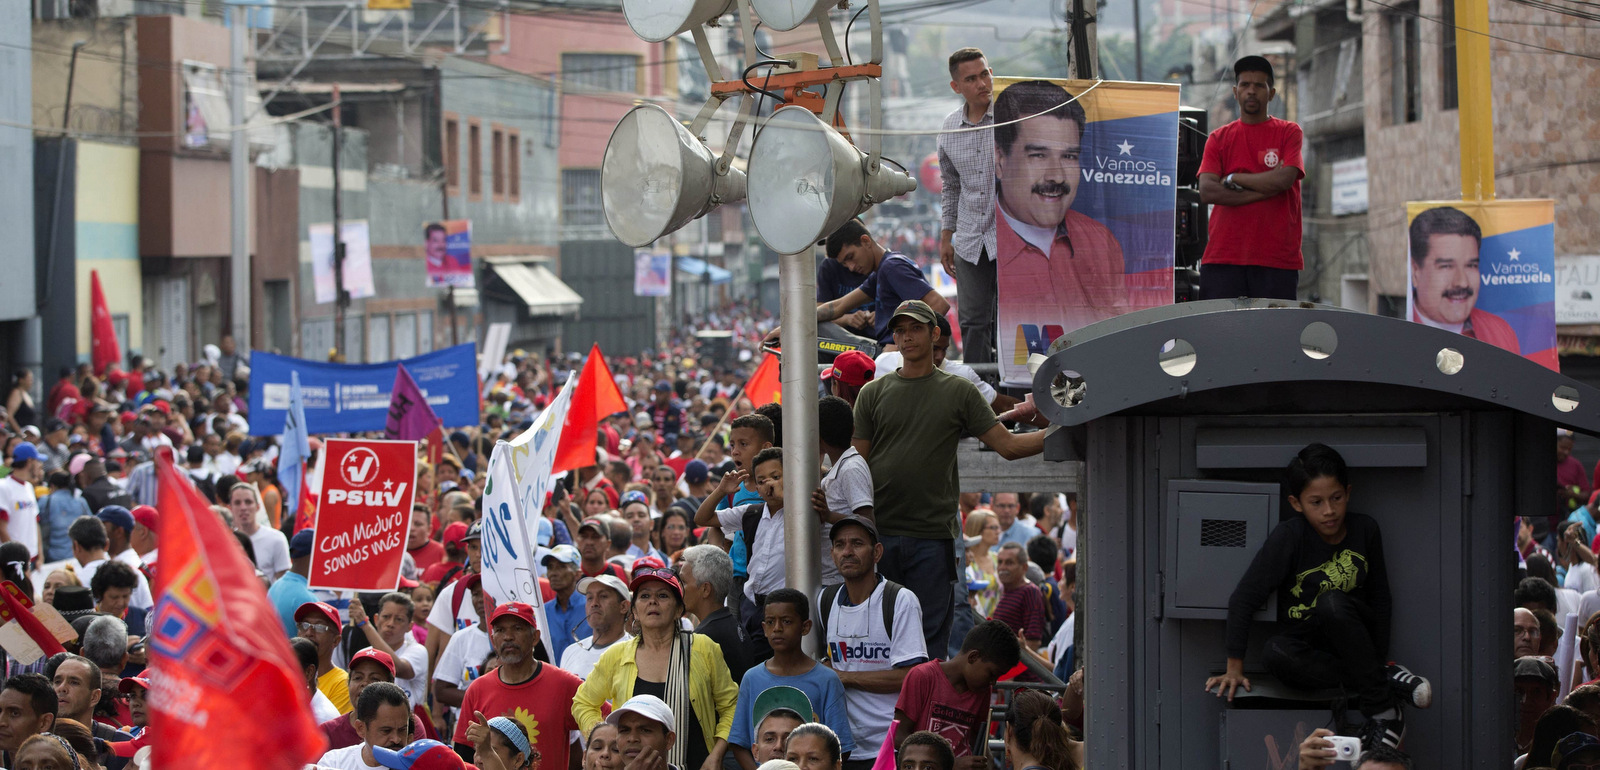 Supporters of President Nicolas Maduro attend a campaign rally in the parish of Catia in Caracas, Venezuela, Friday, May 4, 2018. Venezuelans will vote for a new president in the upcoming presidential elections on May 20. (AP/Ariana Cubillos)